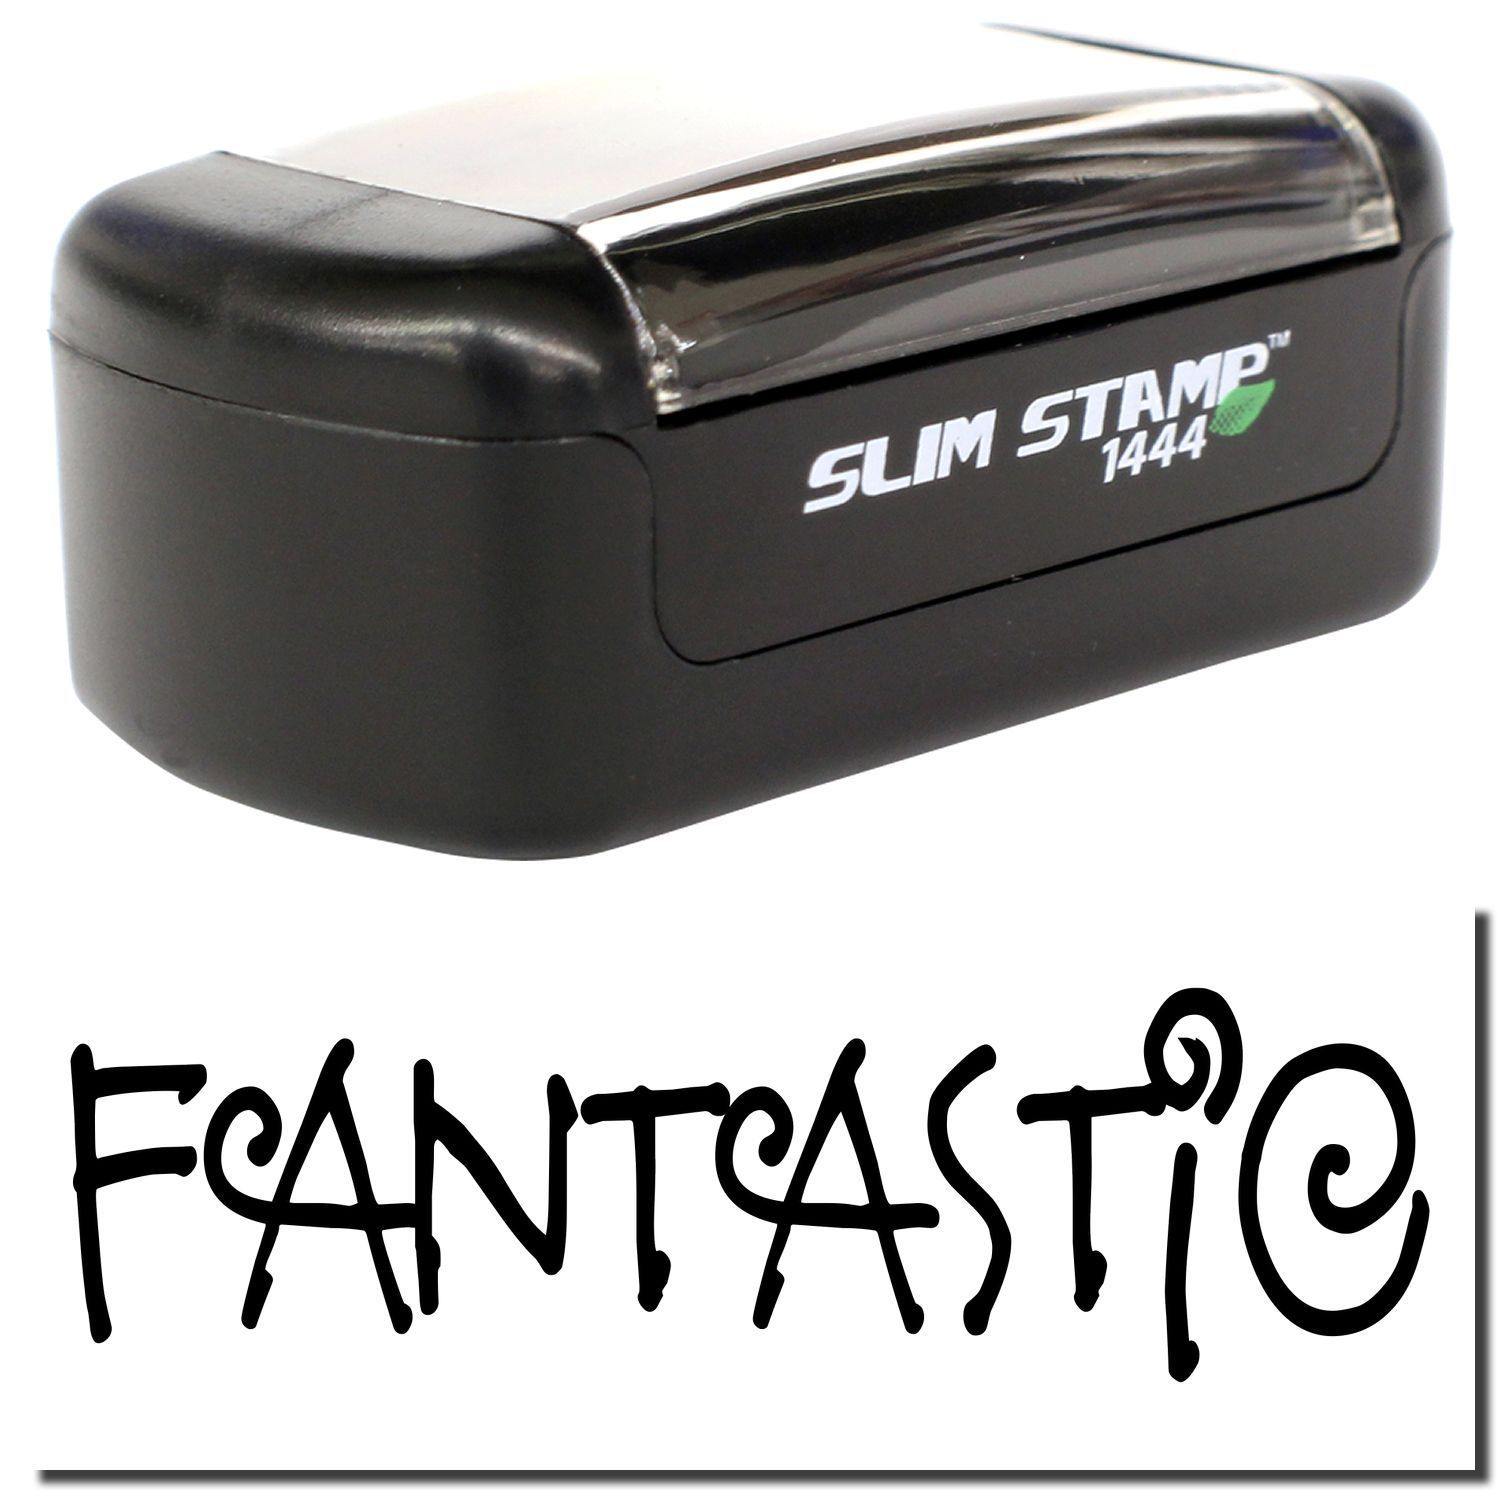 A stock office pre-inked stamp with a stamped image showing how the text "FANTASTIC" is displayed after stamping.